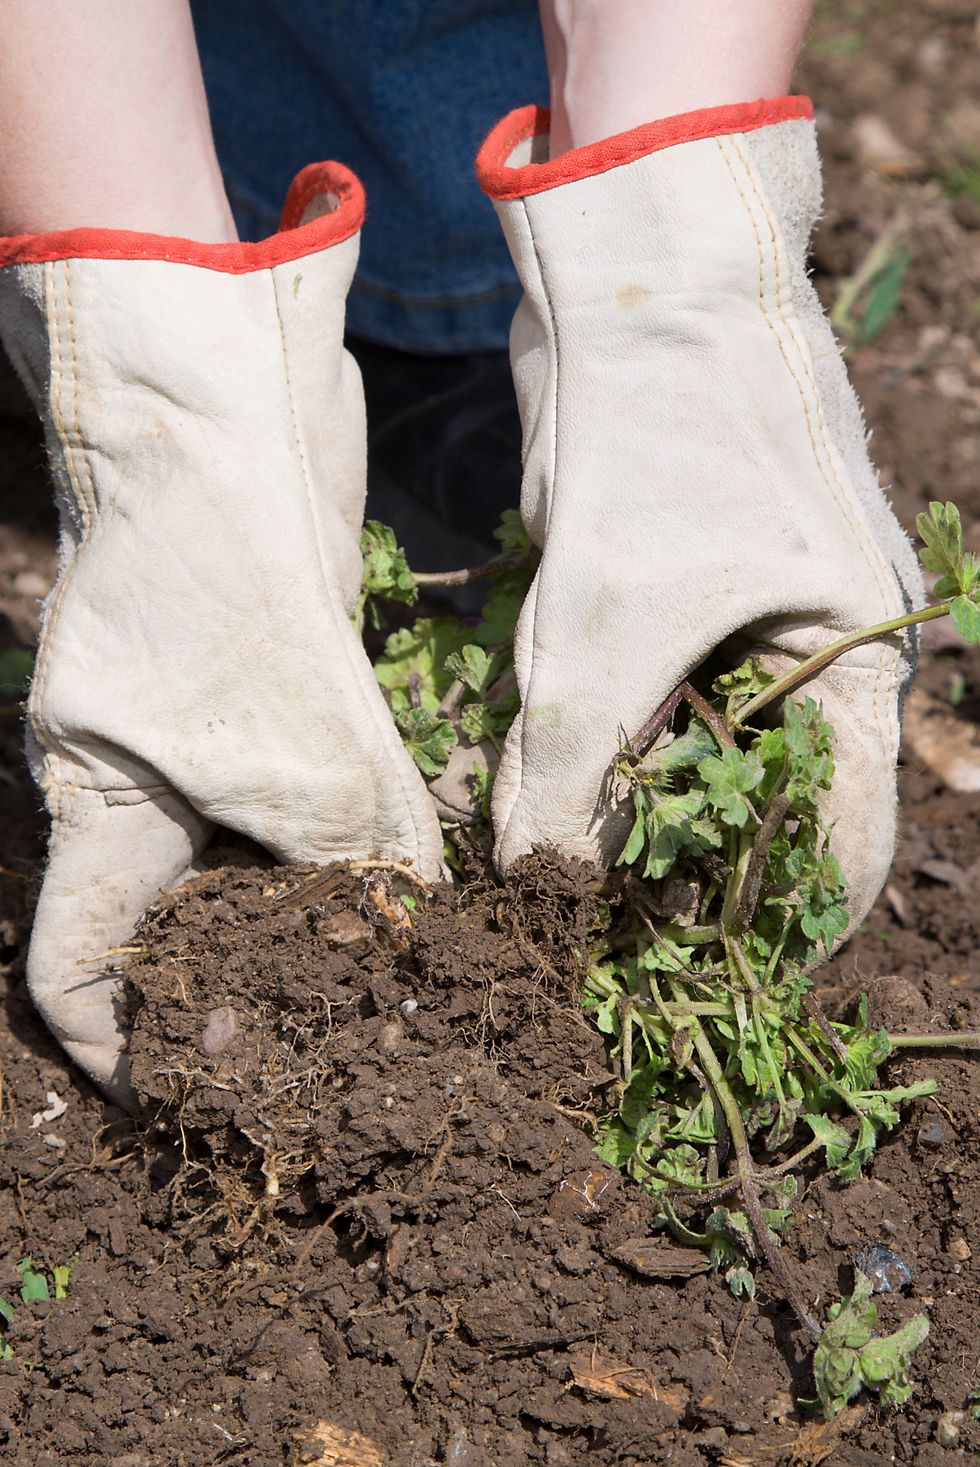 a close up of a gardeners gloved hands as they are pulling weeds in freshly worked soil